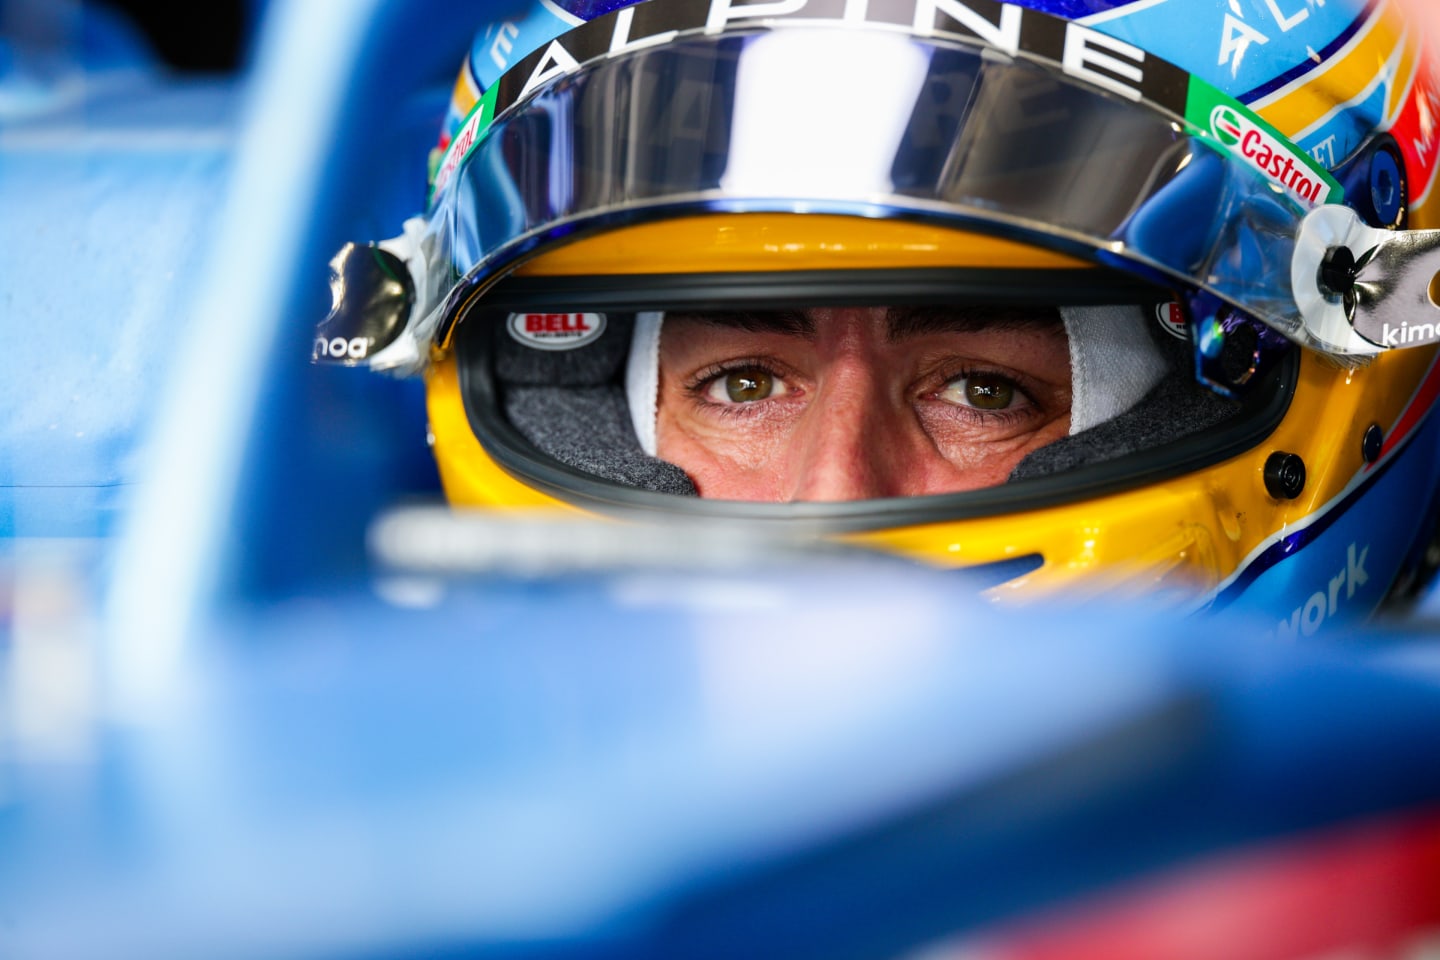 SAO PAULO, BRAZIL - NOVEMBER 14: Fernando Alonso of Alpine F1 and Spain  during the F1 Grand Prix of Brazil at Autodromo Jose Carlos Pace on November 14, 2021 in Sao Paulo, Brazil. (Photo by Peter Fox/Getty Images)